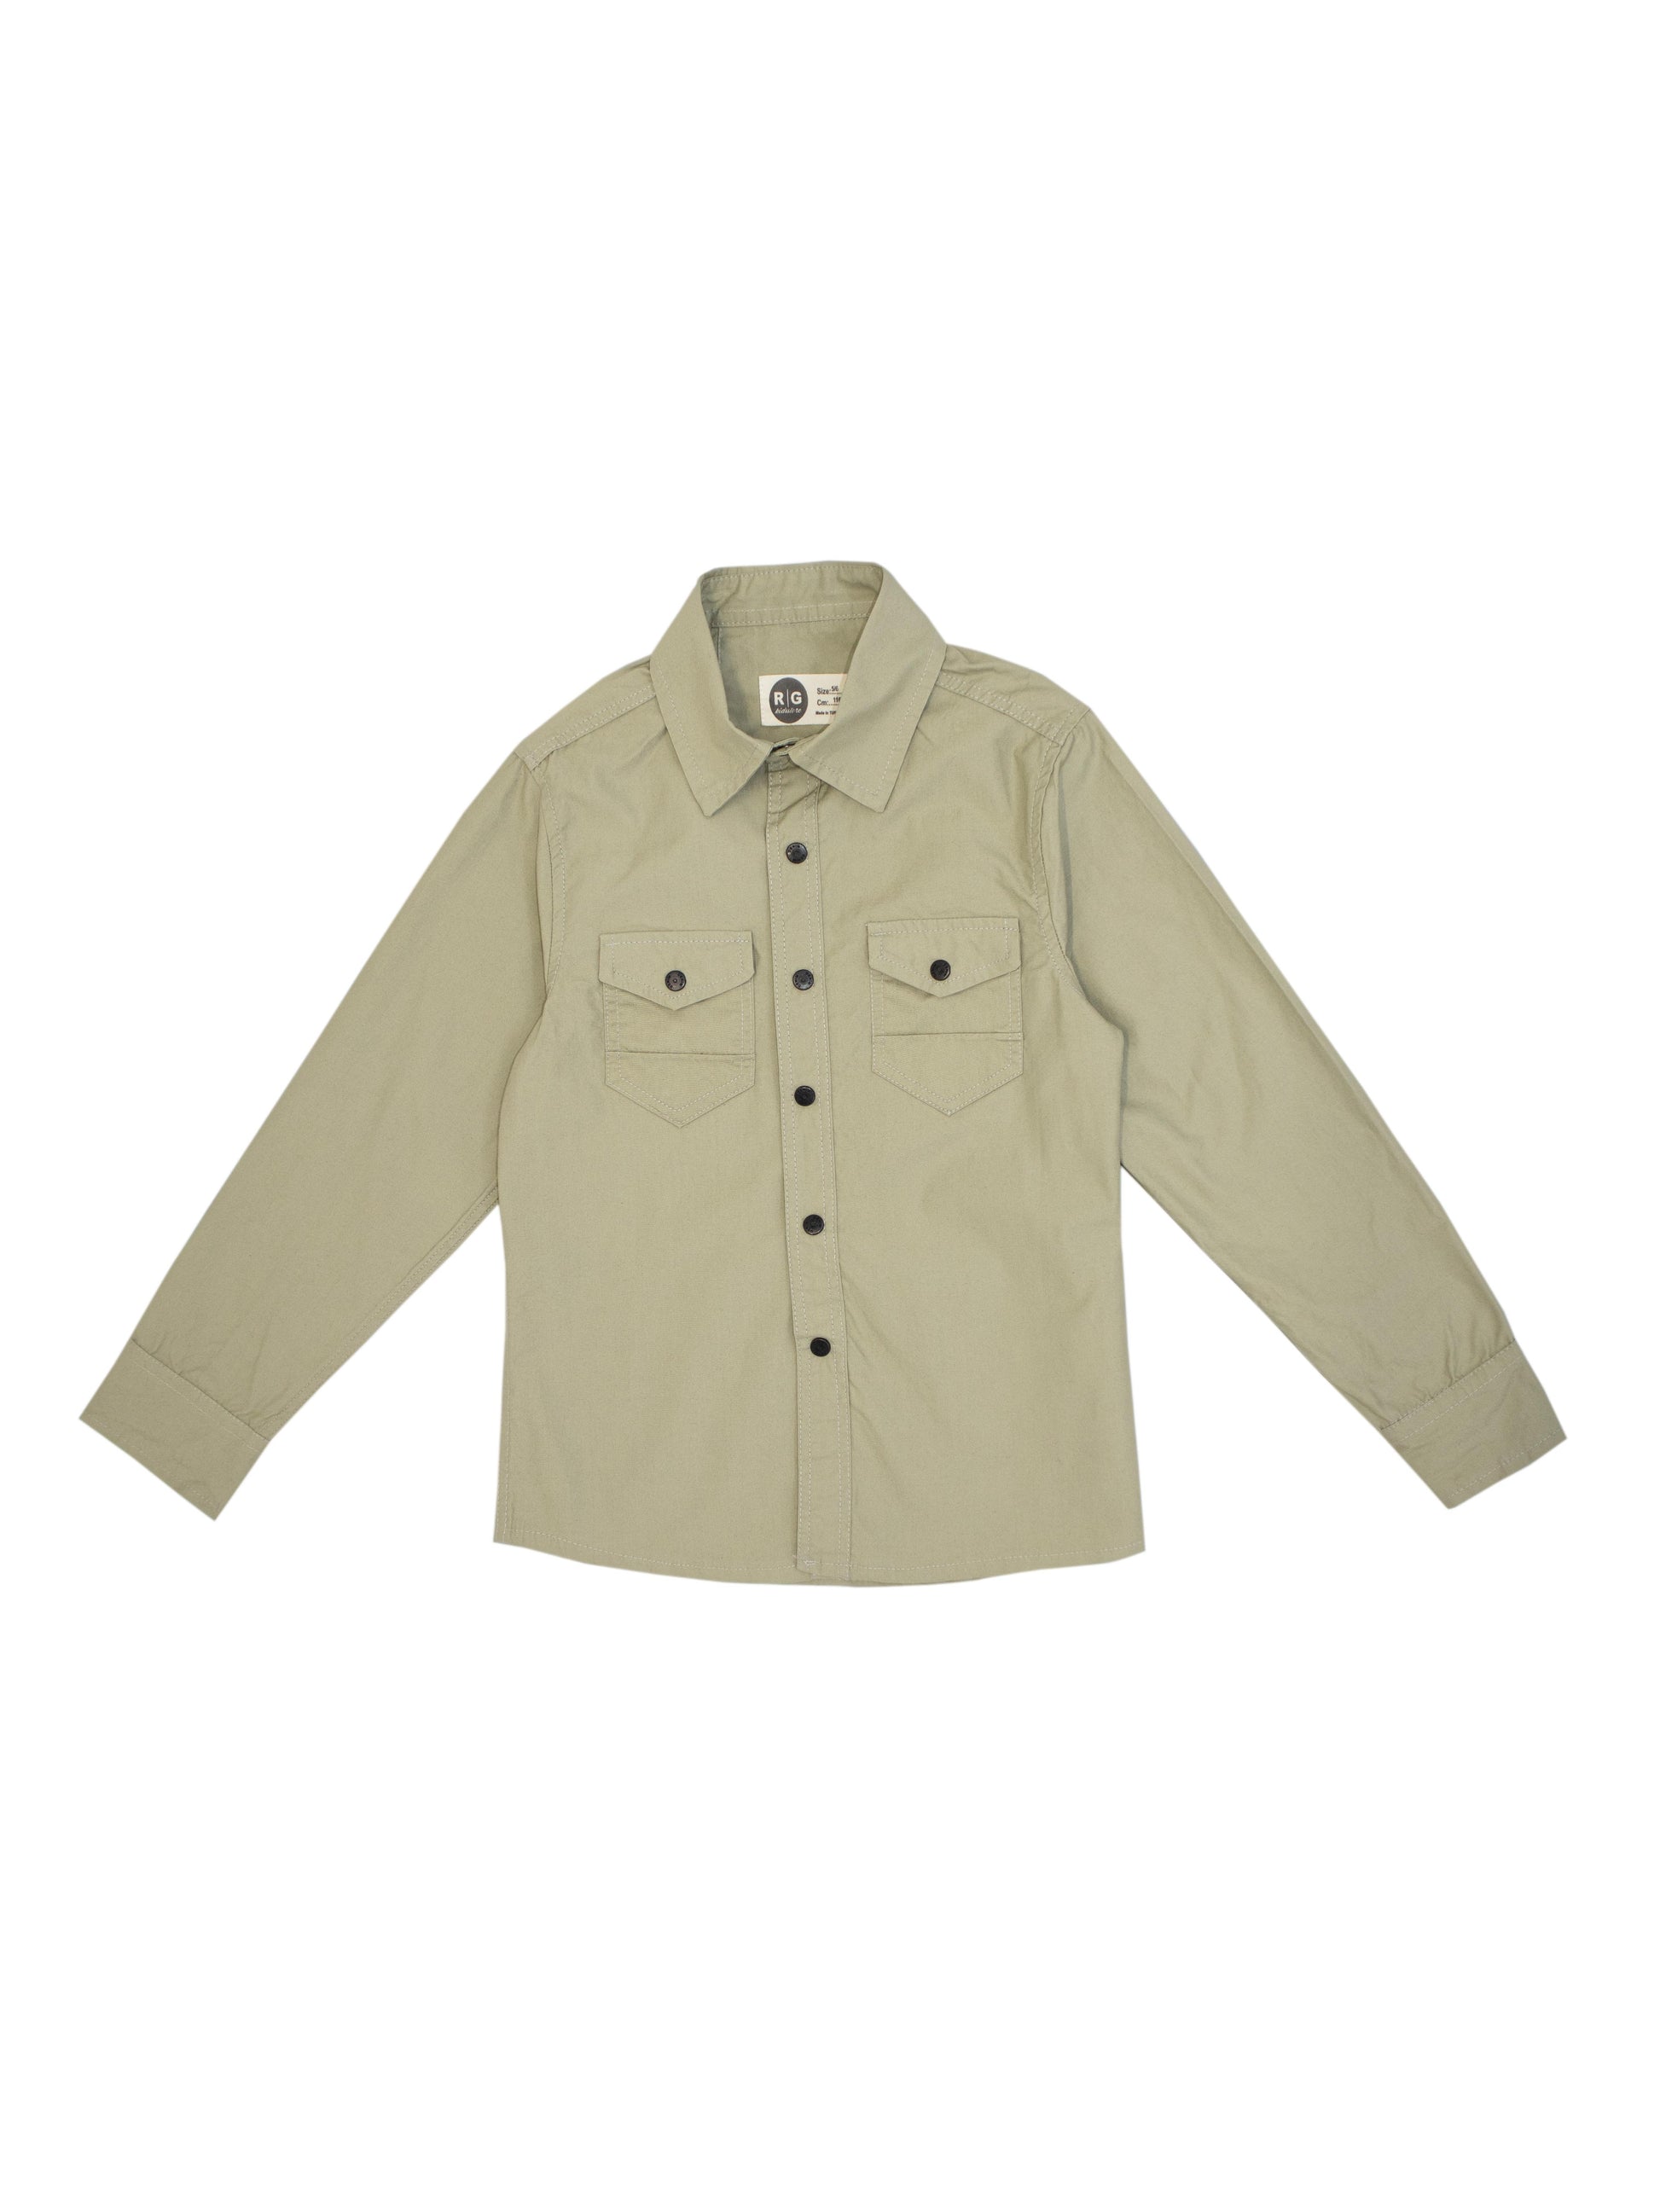 Children's Long Sleeved Shirt With Buttons And Pockets In The Front